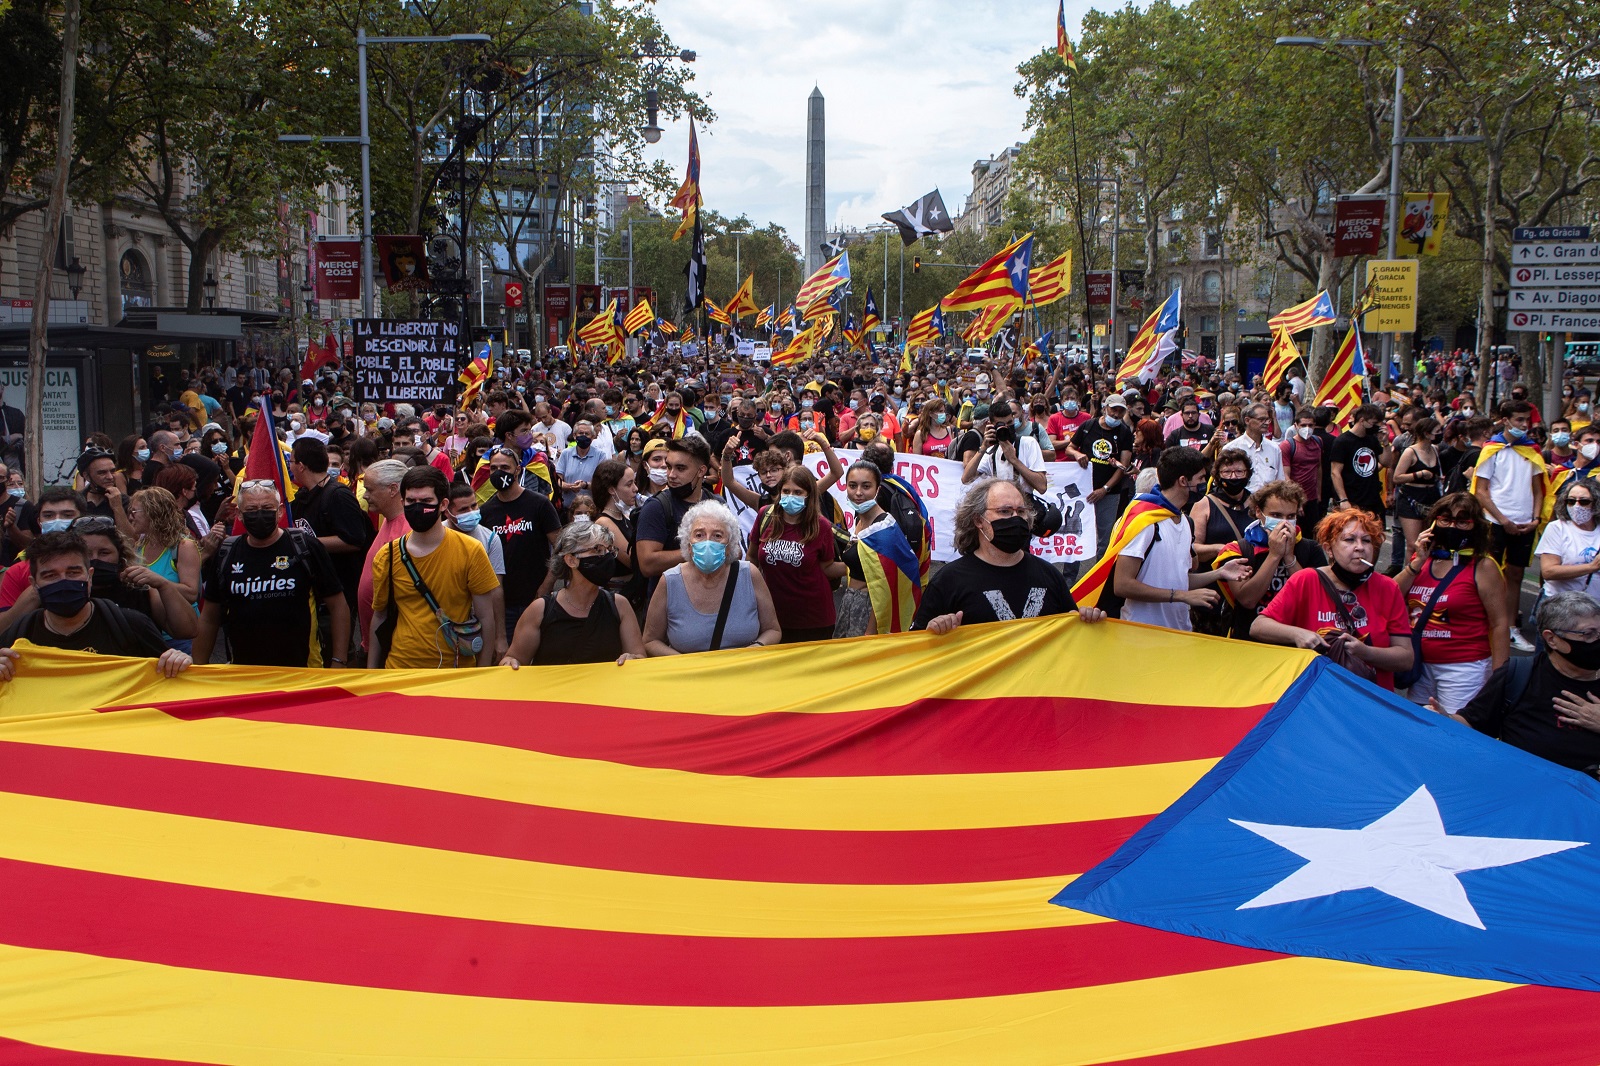 epa09461477 A big pro-independence flag is seen during a demonstration organized by CDR on occasion of the Day of Catalonia, 'Diada', in Barcelona, Catalonia, Spain, 11 September 2021. The Diada is celebrated annually on 11 September and marks the fall of Barcelona during the War of the Spanish Succession in 1714.  EPA/Enric Fontcuberta